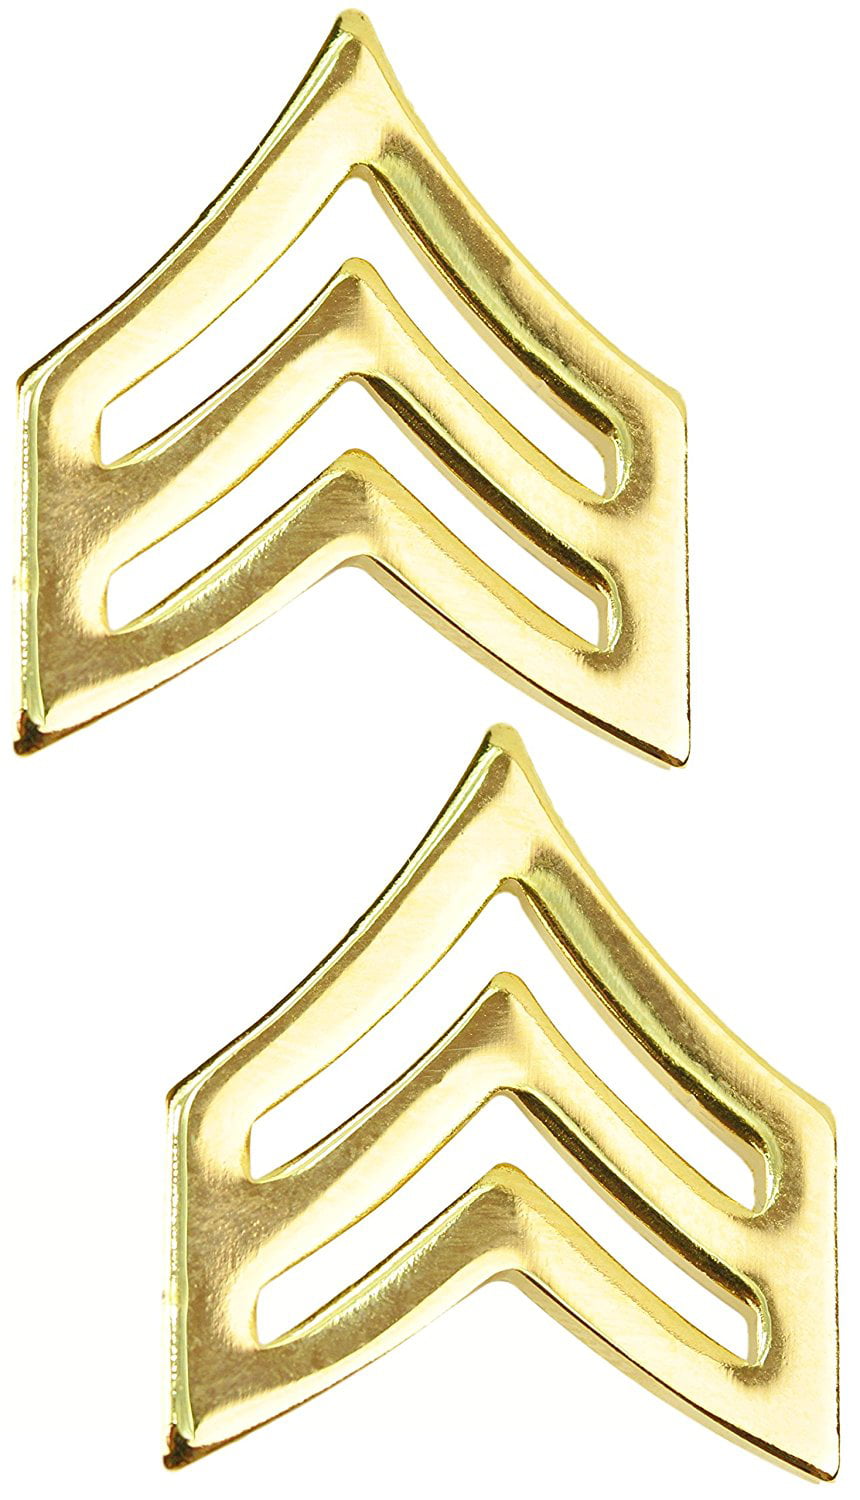 FREE Shipping! Sargent Insignia in Gold 3/4" Wide 